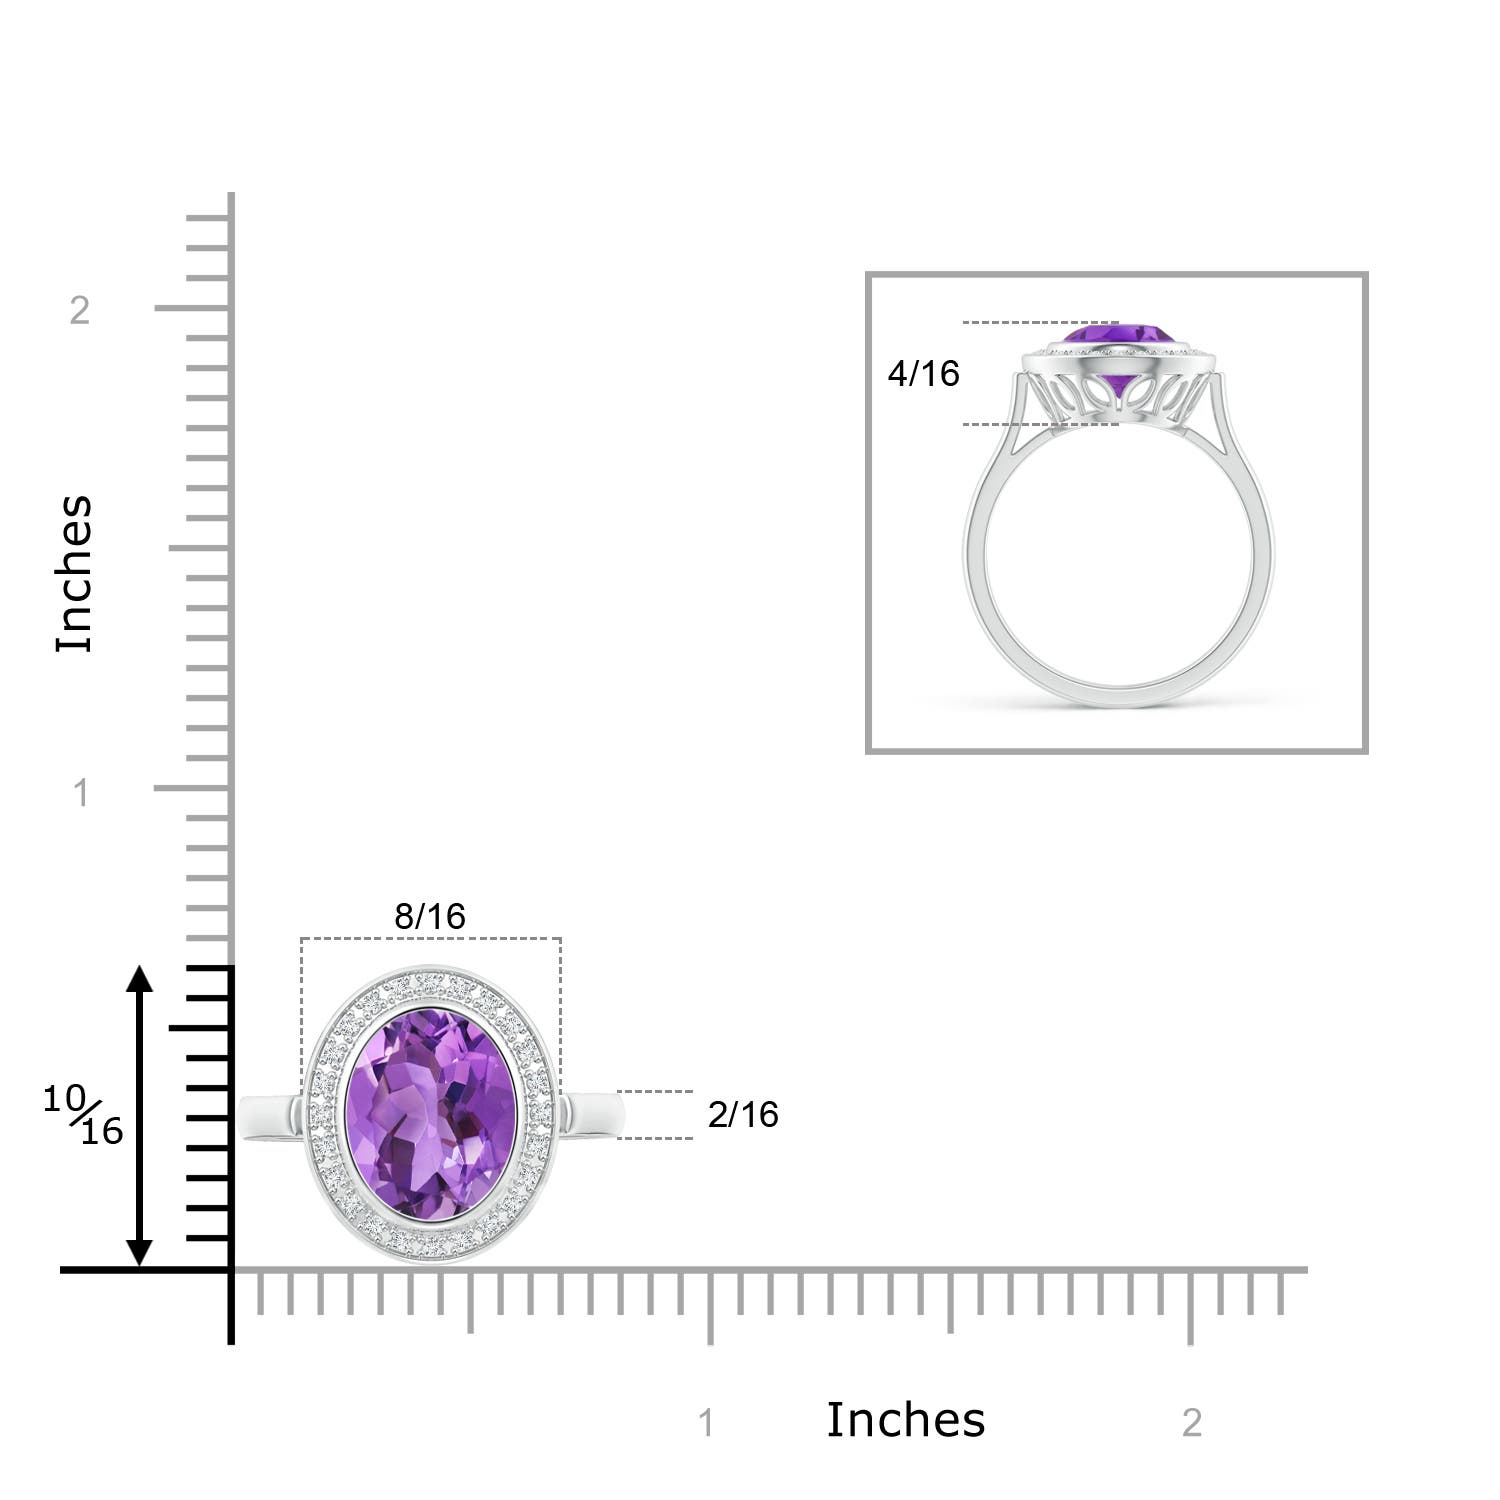 AA - Amethyst / 2.44 CT / 14 KT White Gold